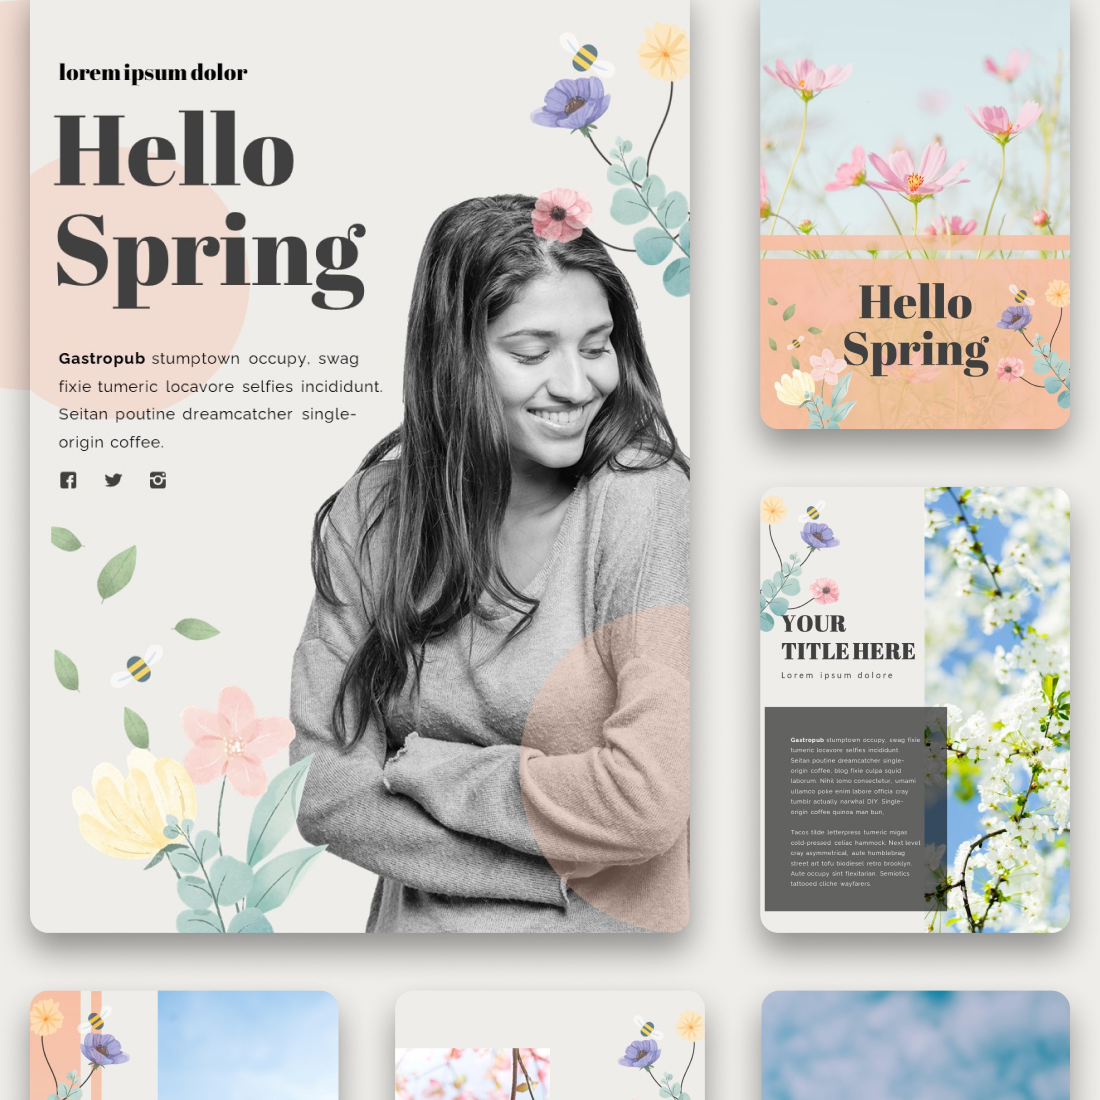 Collection of images of colorful presentation slides on the theme of the coming of spring.